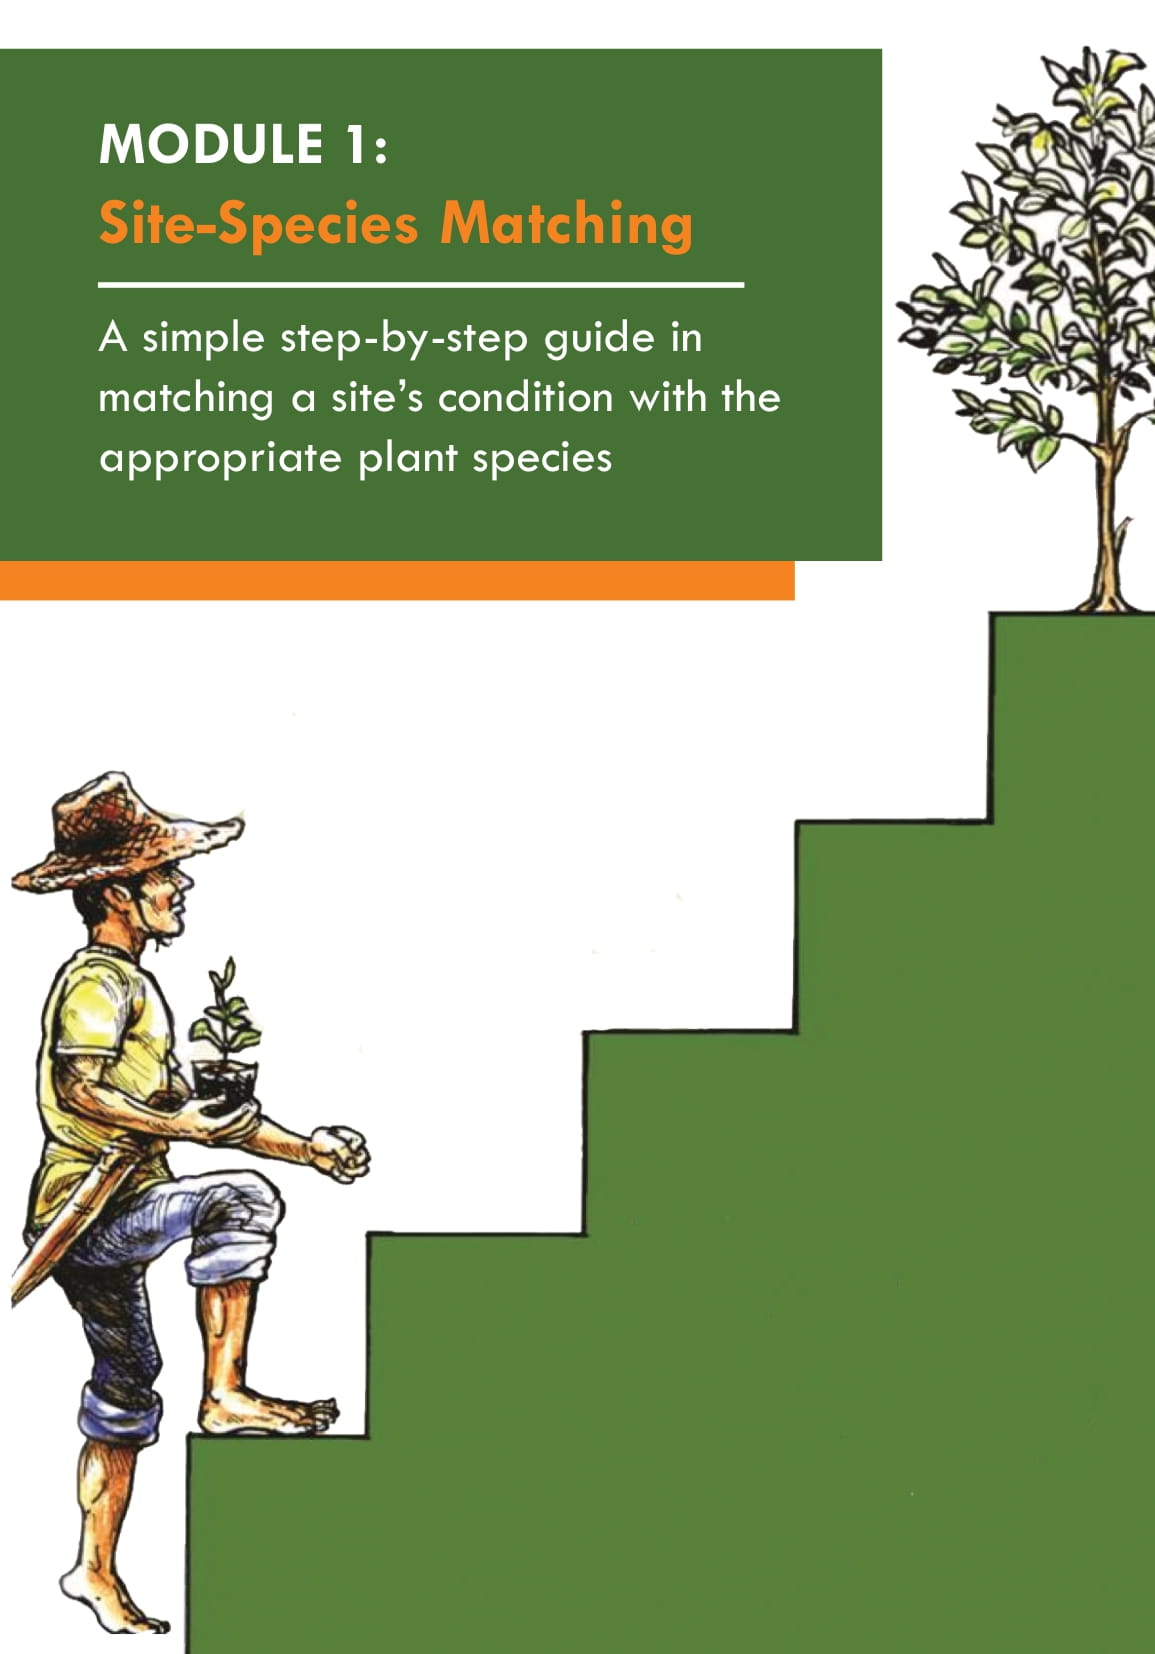 Copy of Copy of 2016 Forest Restoration Manual - Module 1 Site Species Matching-02